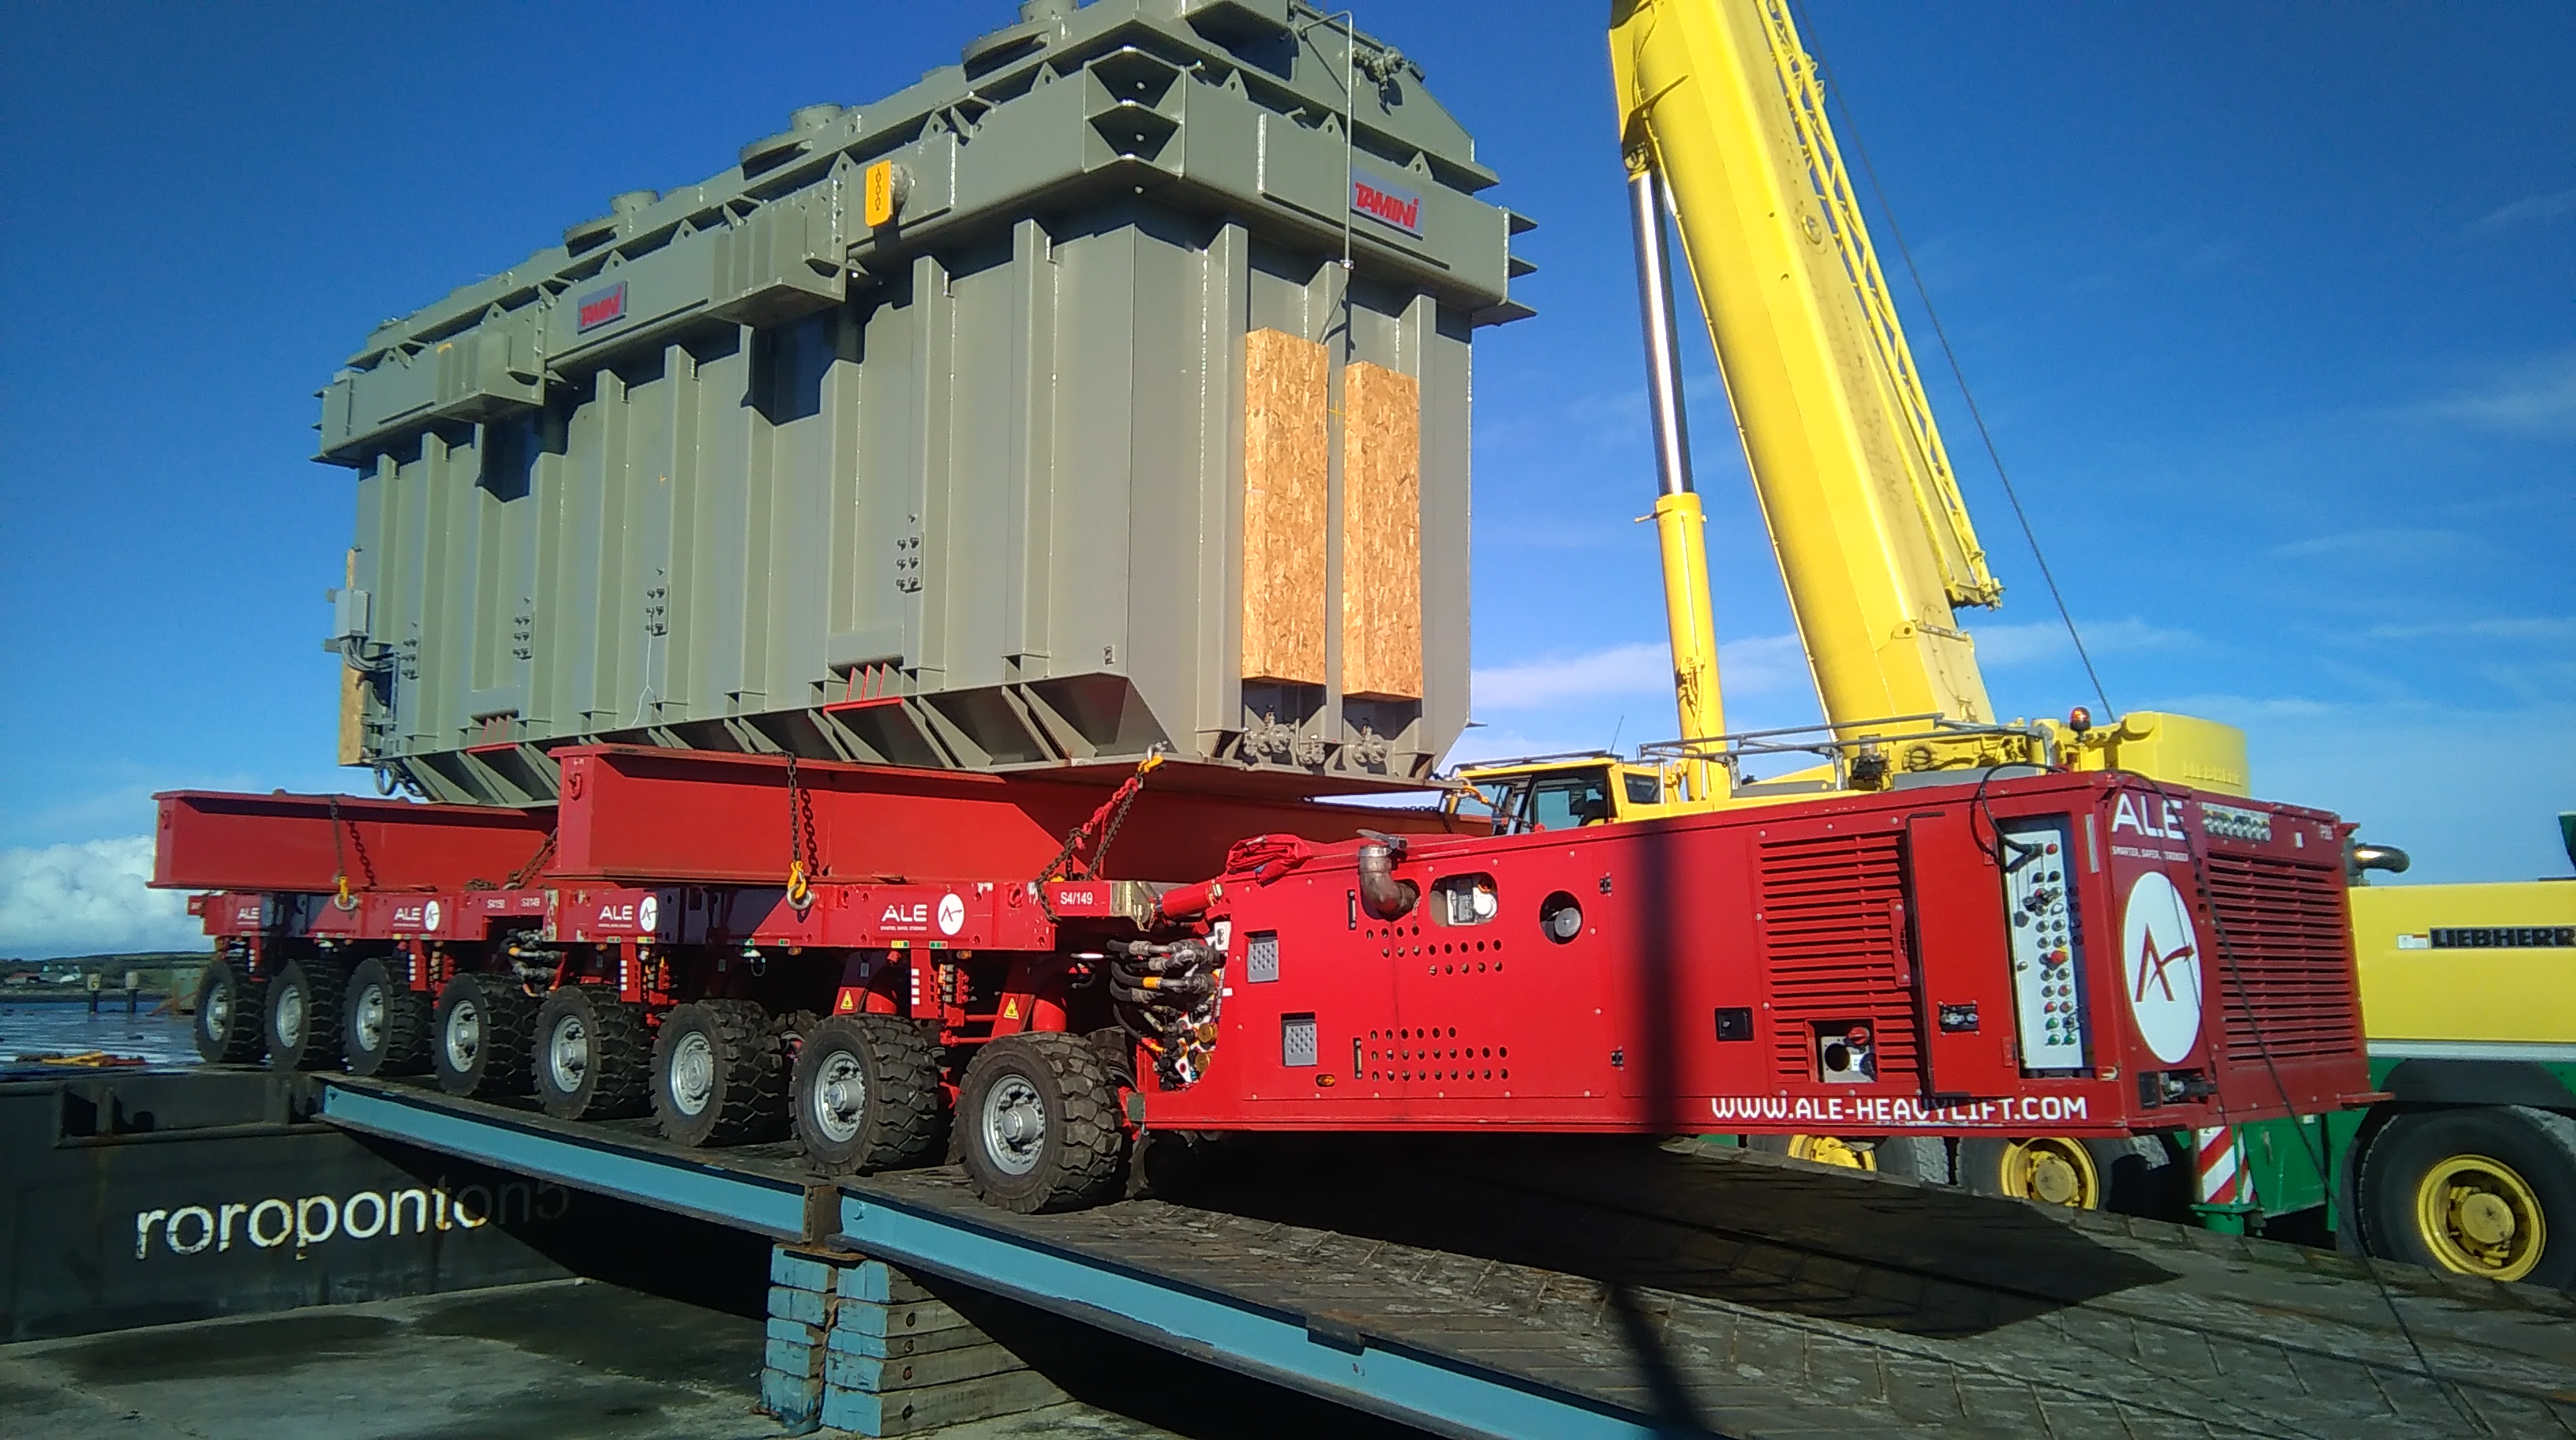 ALE has delivered a transformer, weighing 345 tonnes, to a power station in County Claire, Ireland.